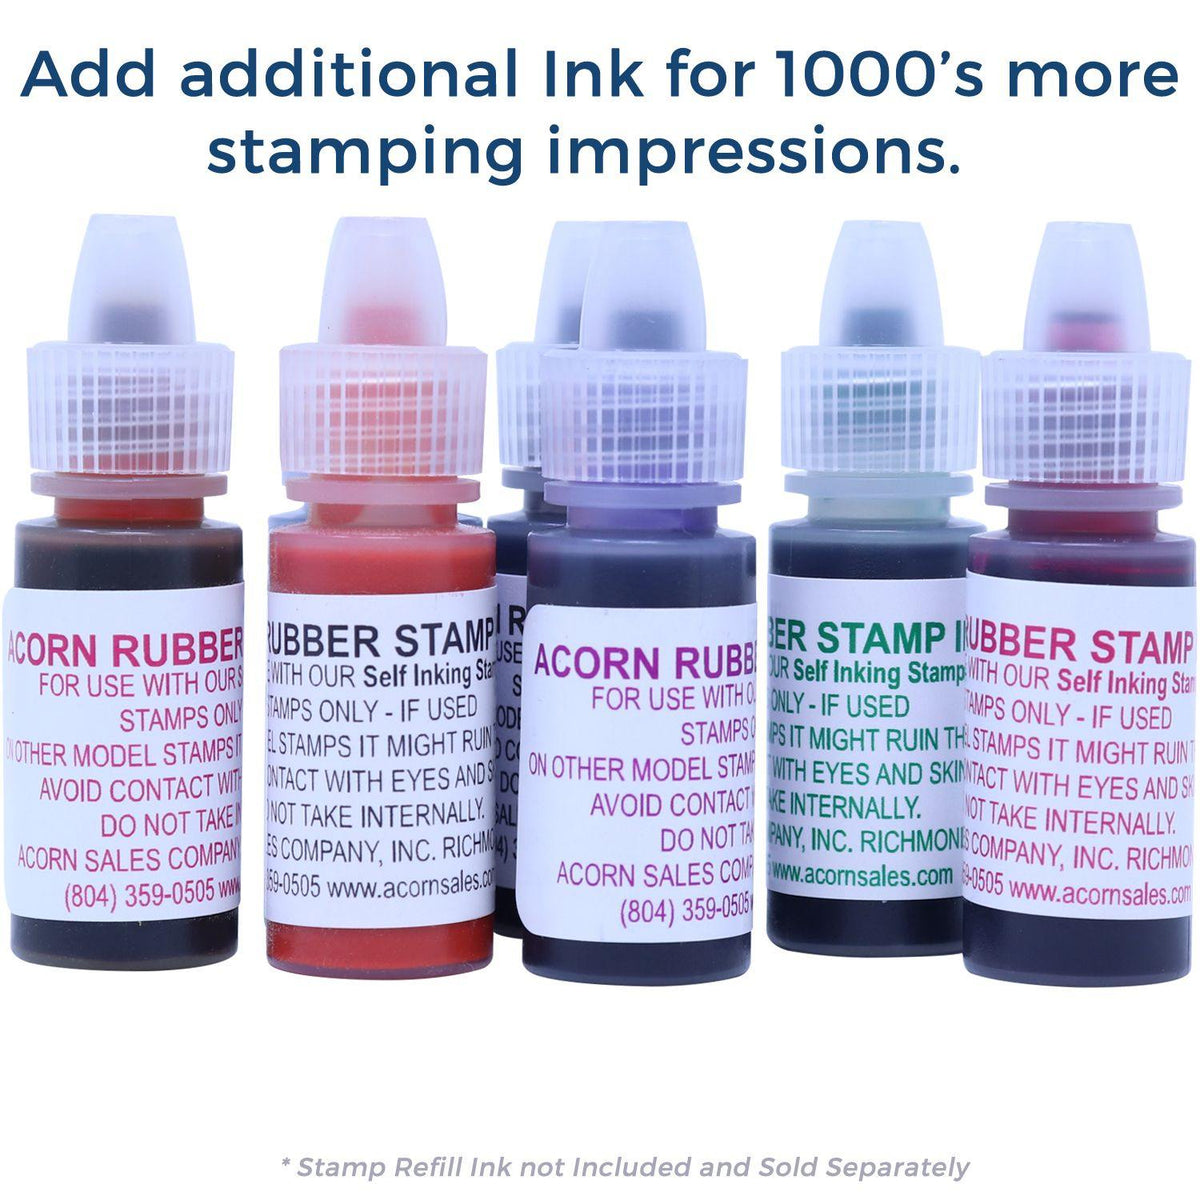 Refill Inks for Large Pre-Inked Refused Stamp Available